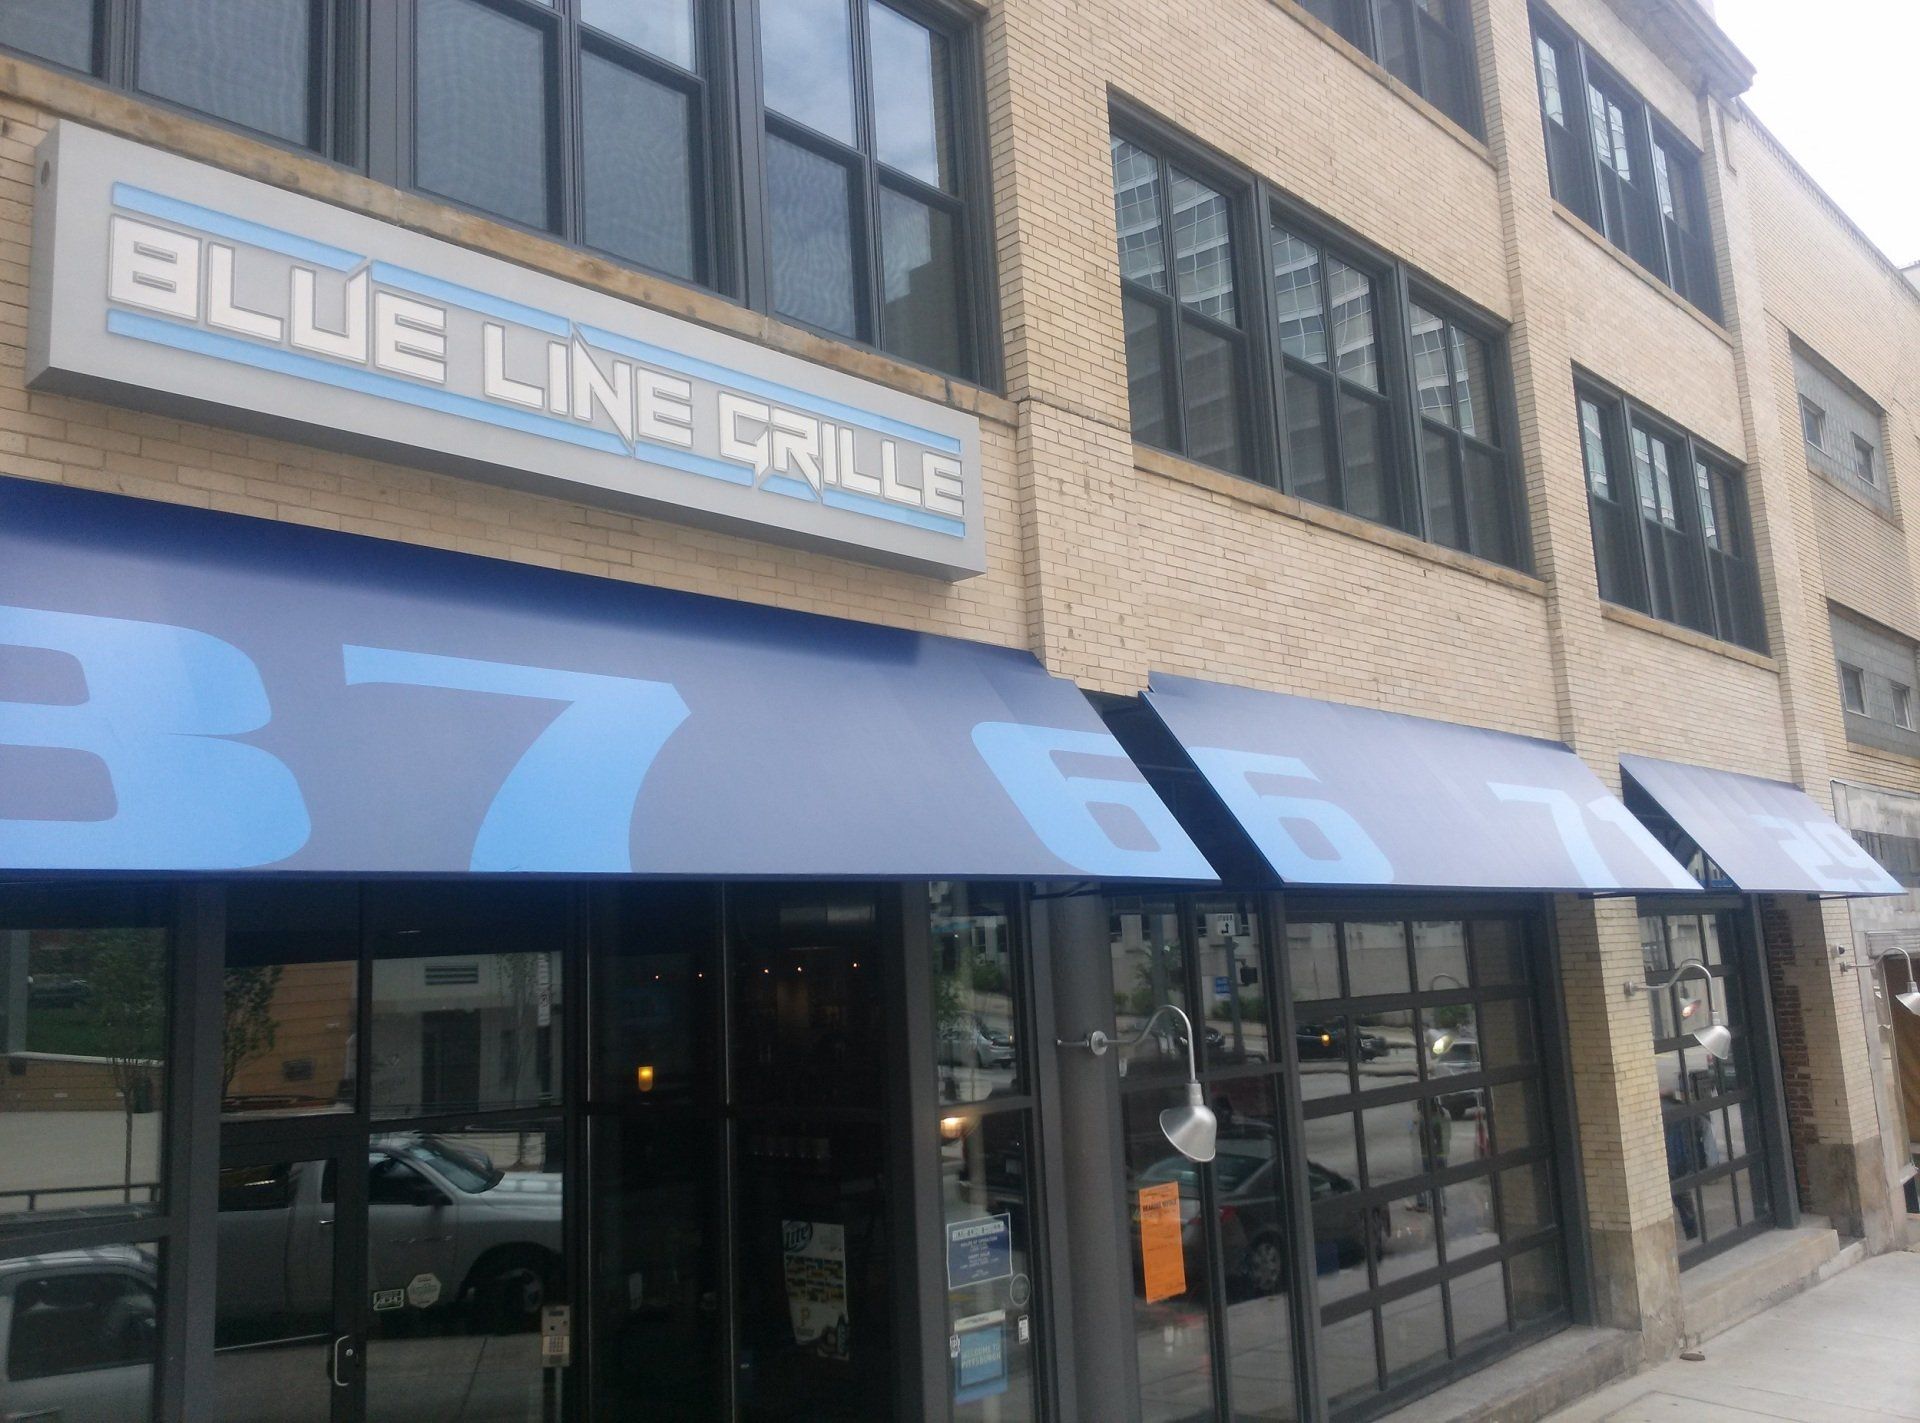 Commercial awning-9 — Custom awnings in Pittsburgh, PA